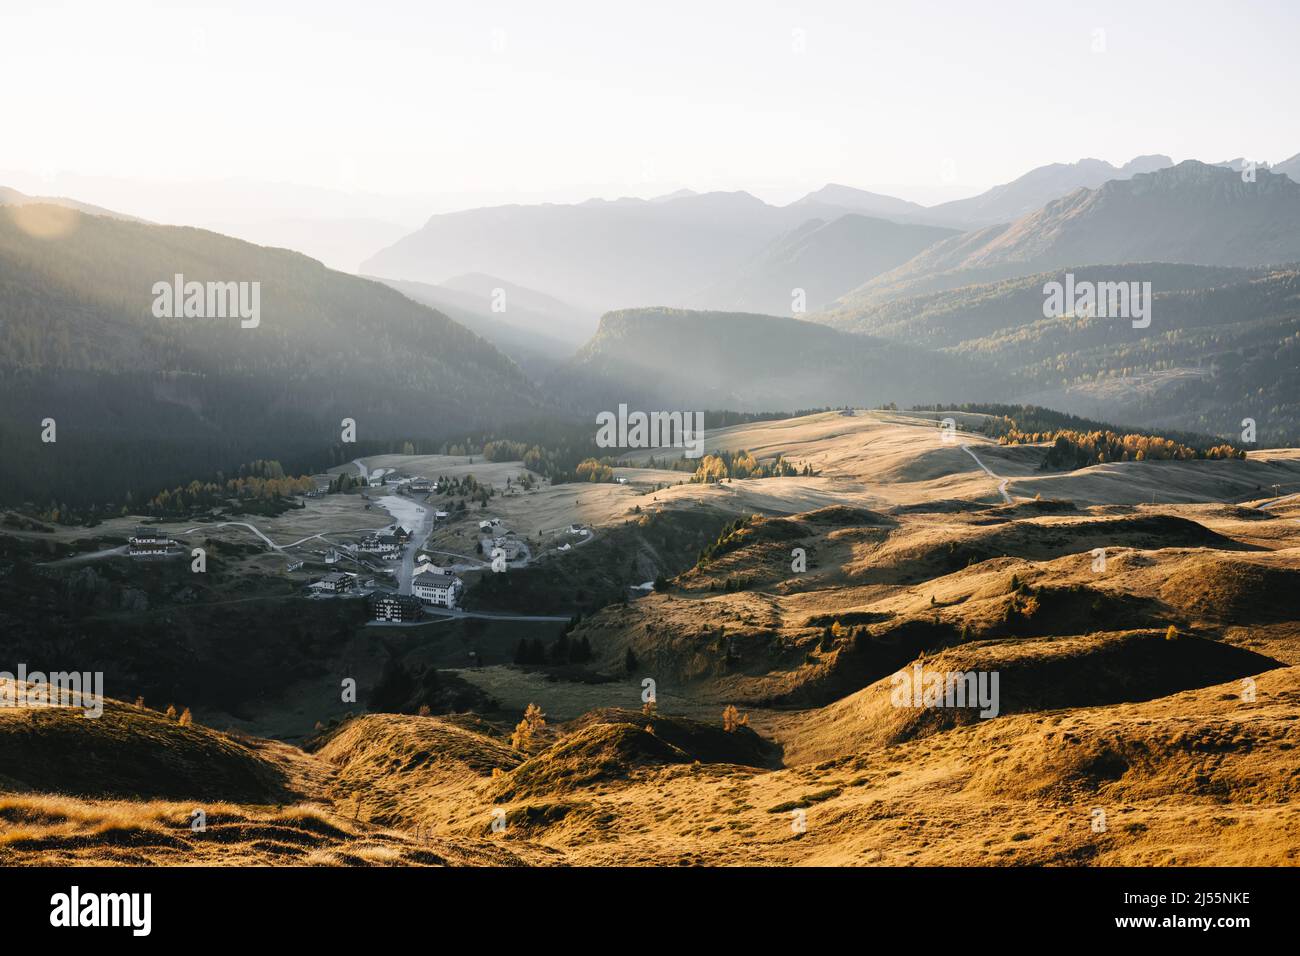 Aerial flyght over italian Dolomite mountains in sunset time. Orange hills glowing by sunset light. San Martino di Castrozza, Dolomites, Trentino, Italy. Landscape photography Stock Photo